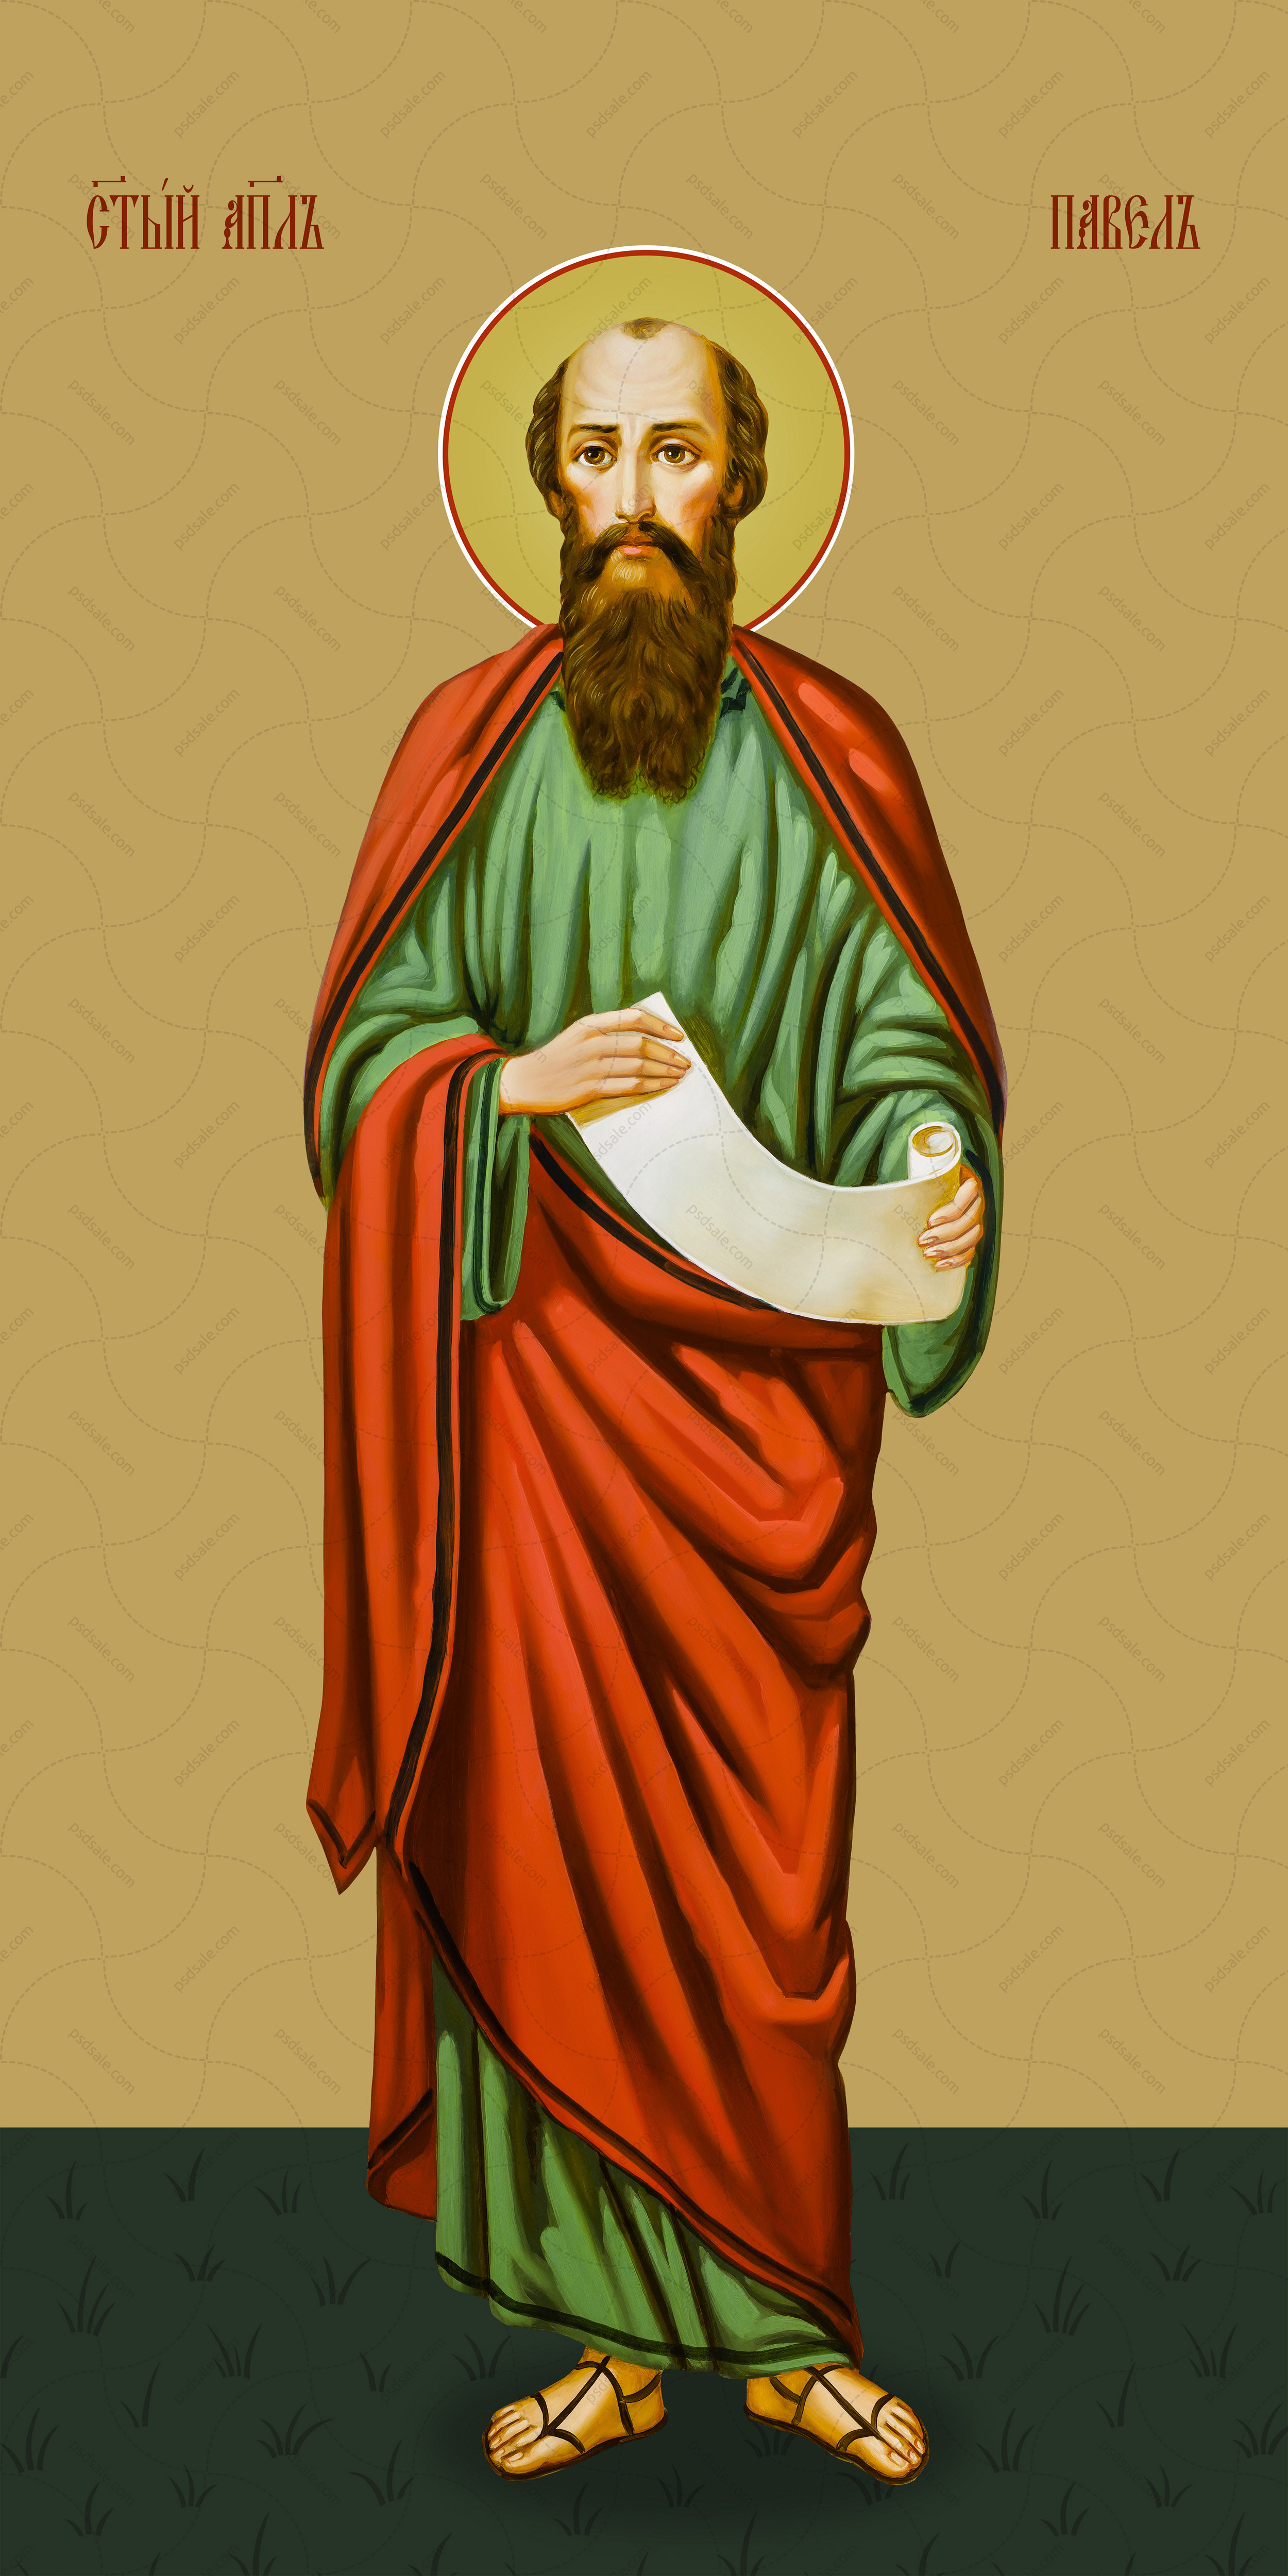 Paul, the holy apostle